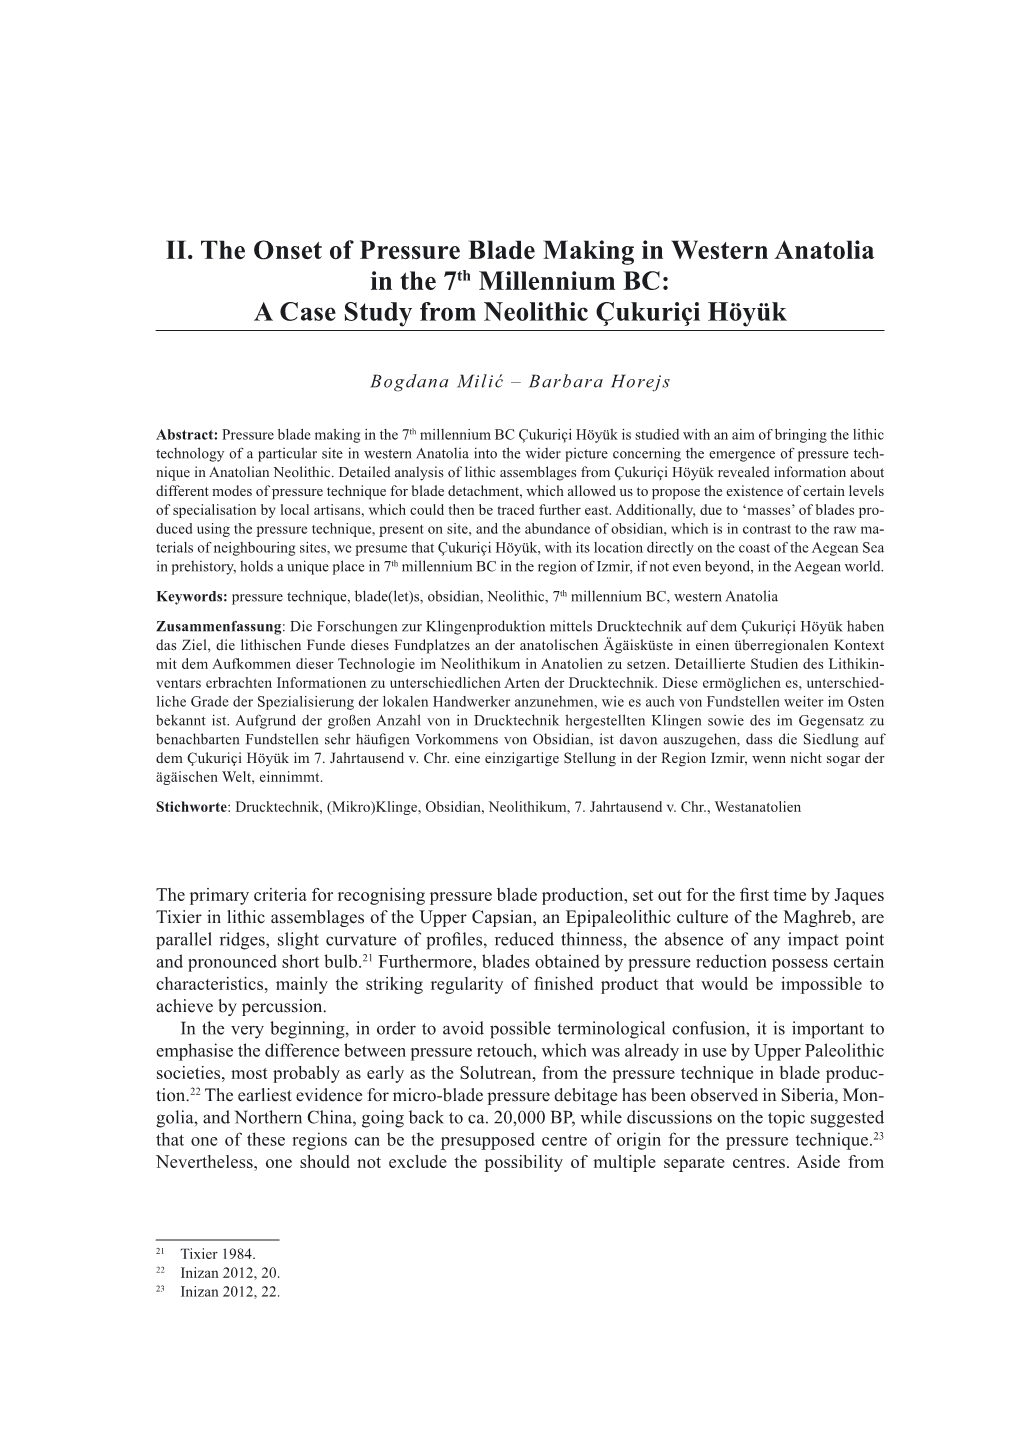 II. the Onset of Pressure Blade Making in Western Anatolia in the 7Th Millennium BC 27